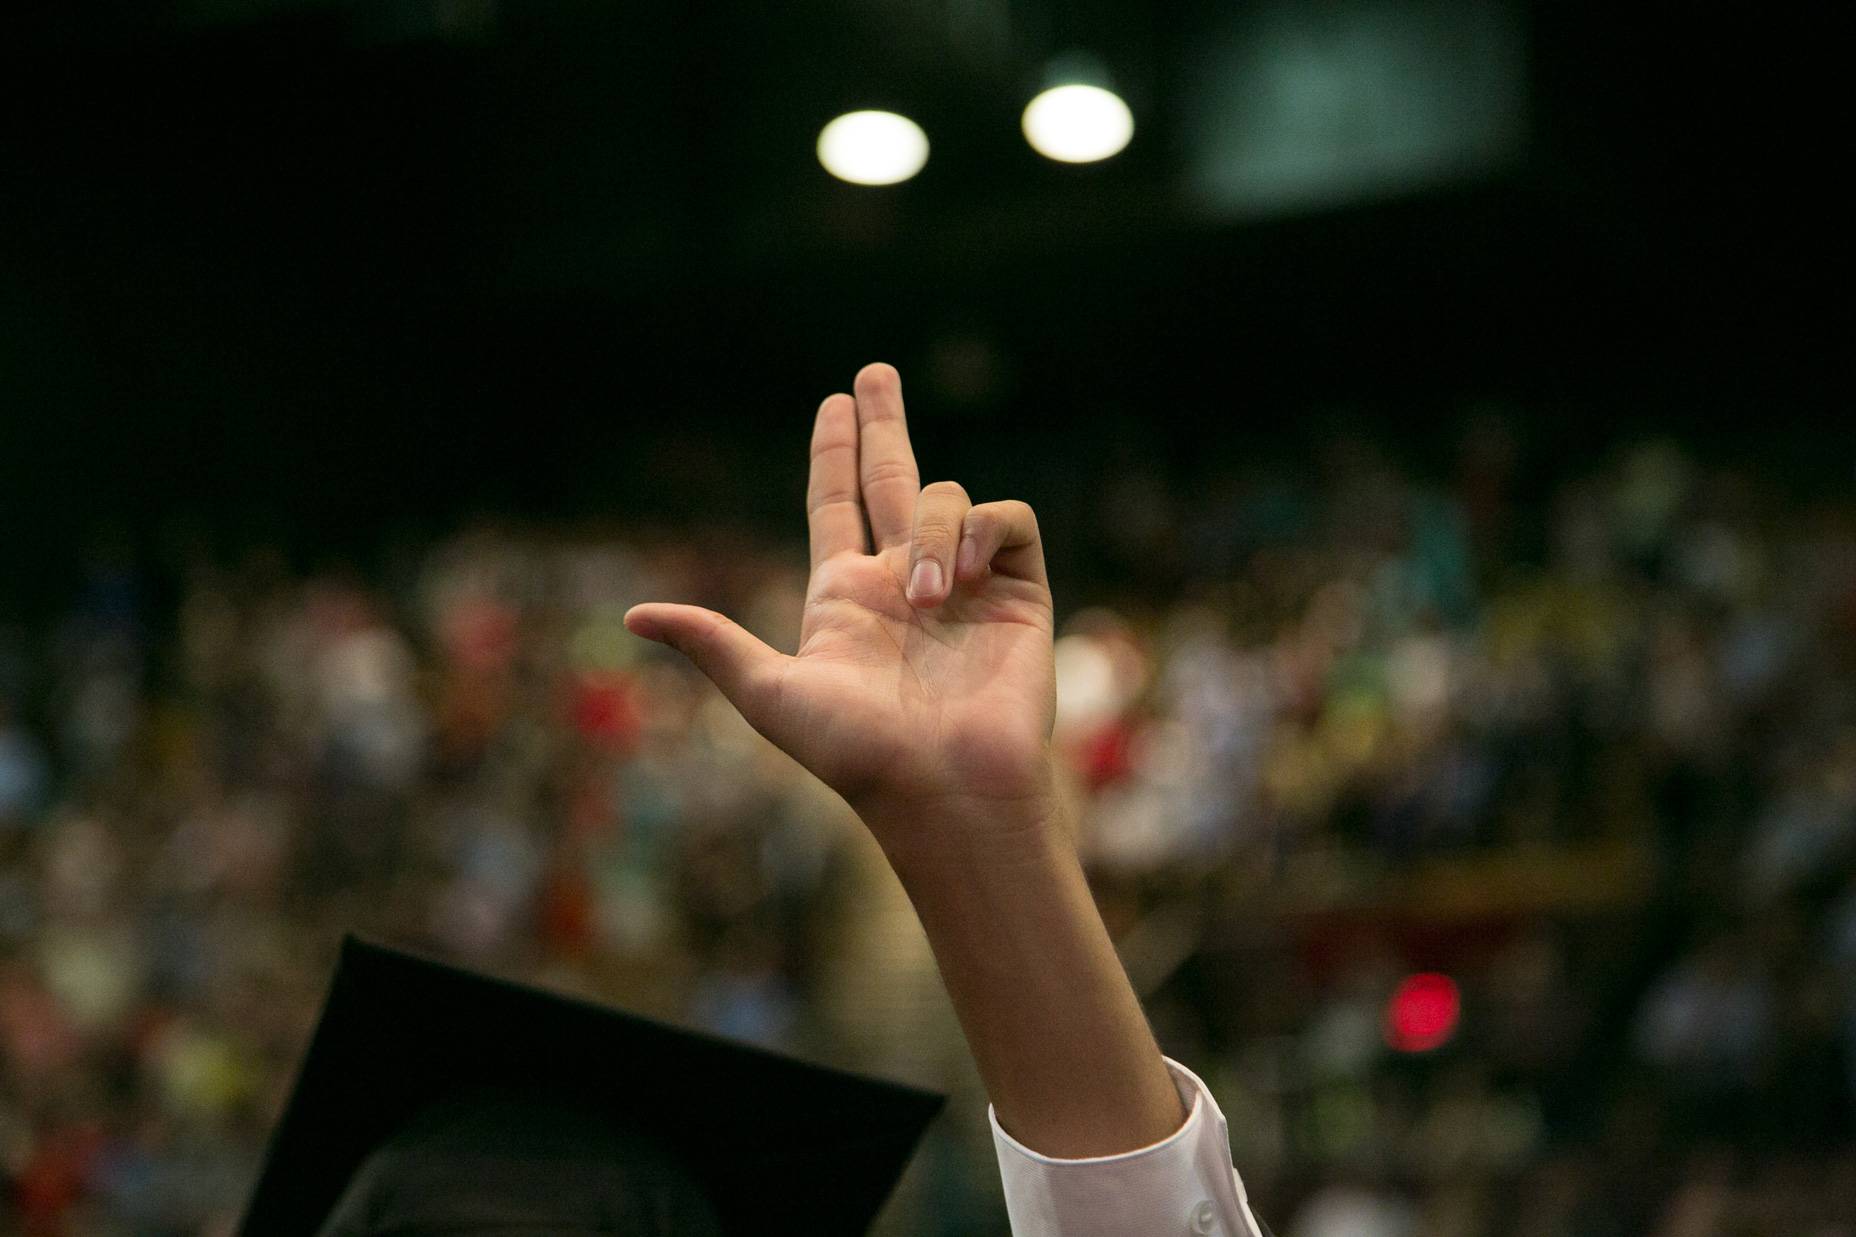 Texas State handsign